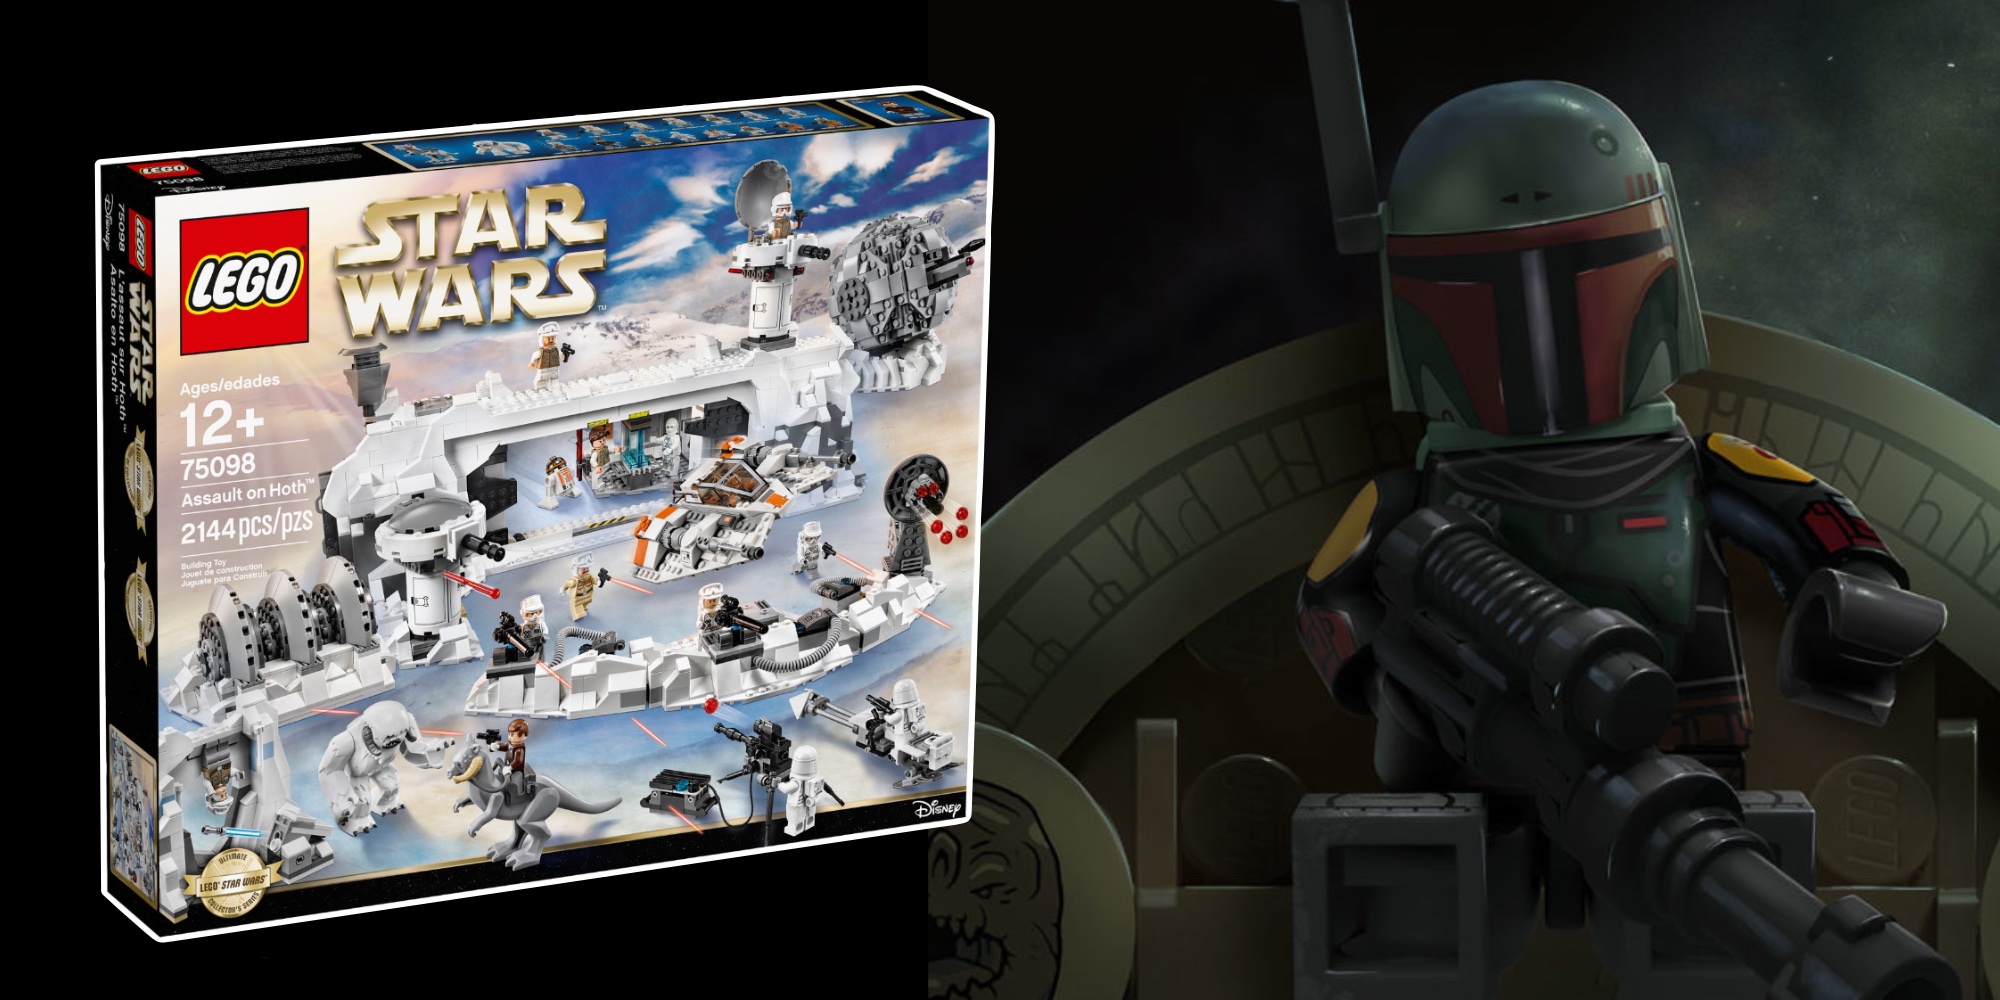 Lego May 2022 Calendar Lego Star Wars Summer 2022 Lineup: What To Expect - 9To5Toys